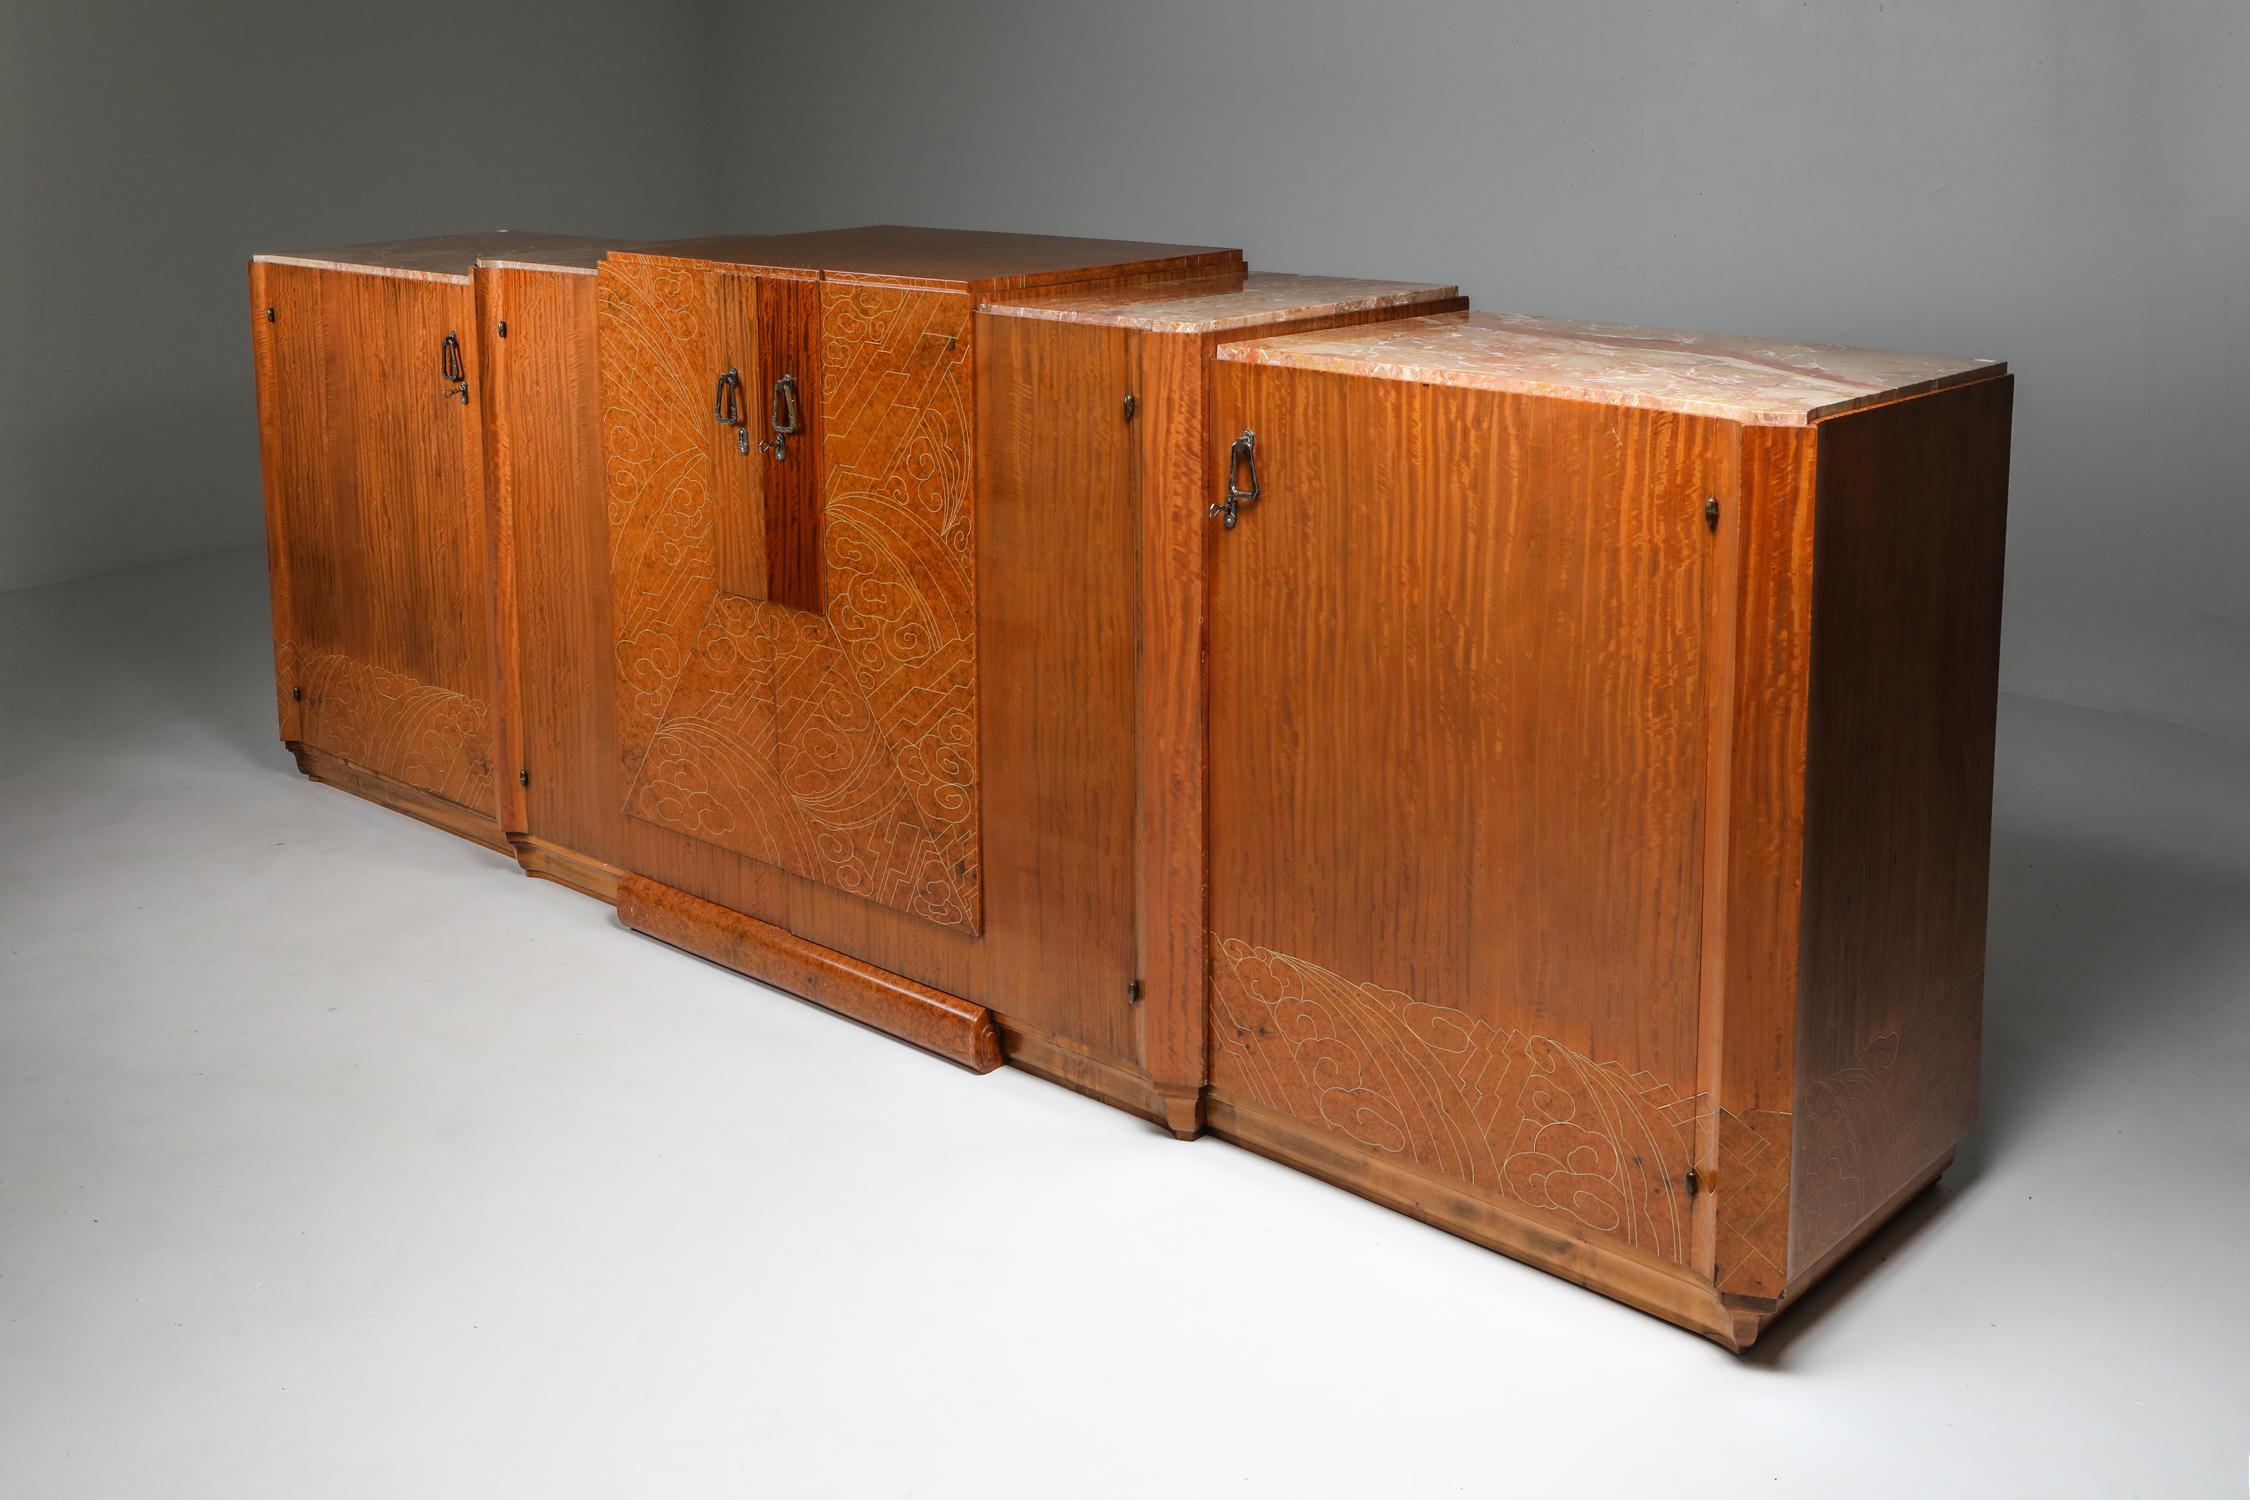 Marble Art Deco High-End Credenza, mahogany, burl, loupe d'amboine and marble, 1930's